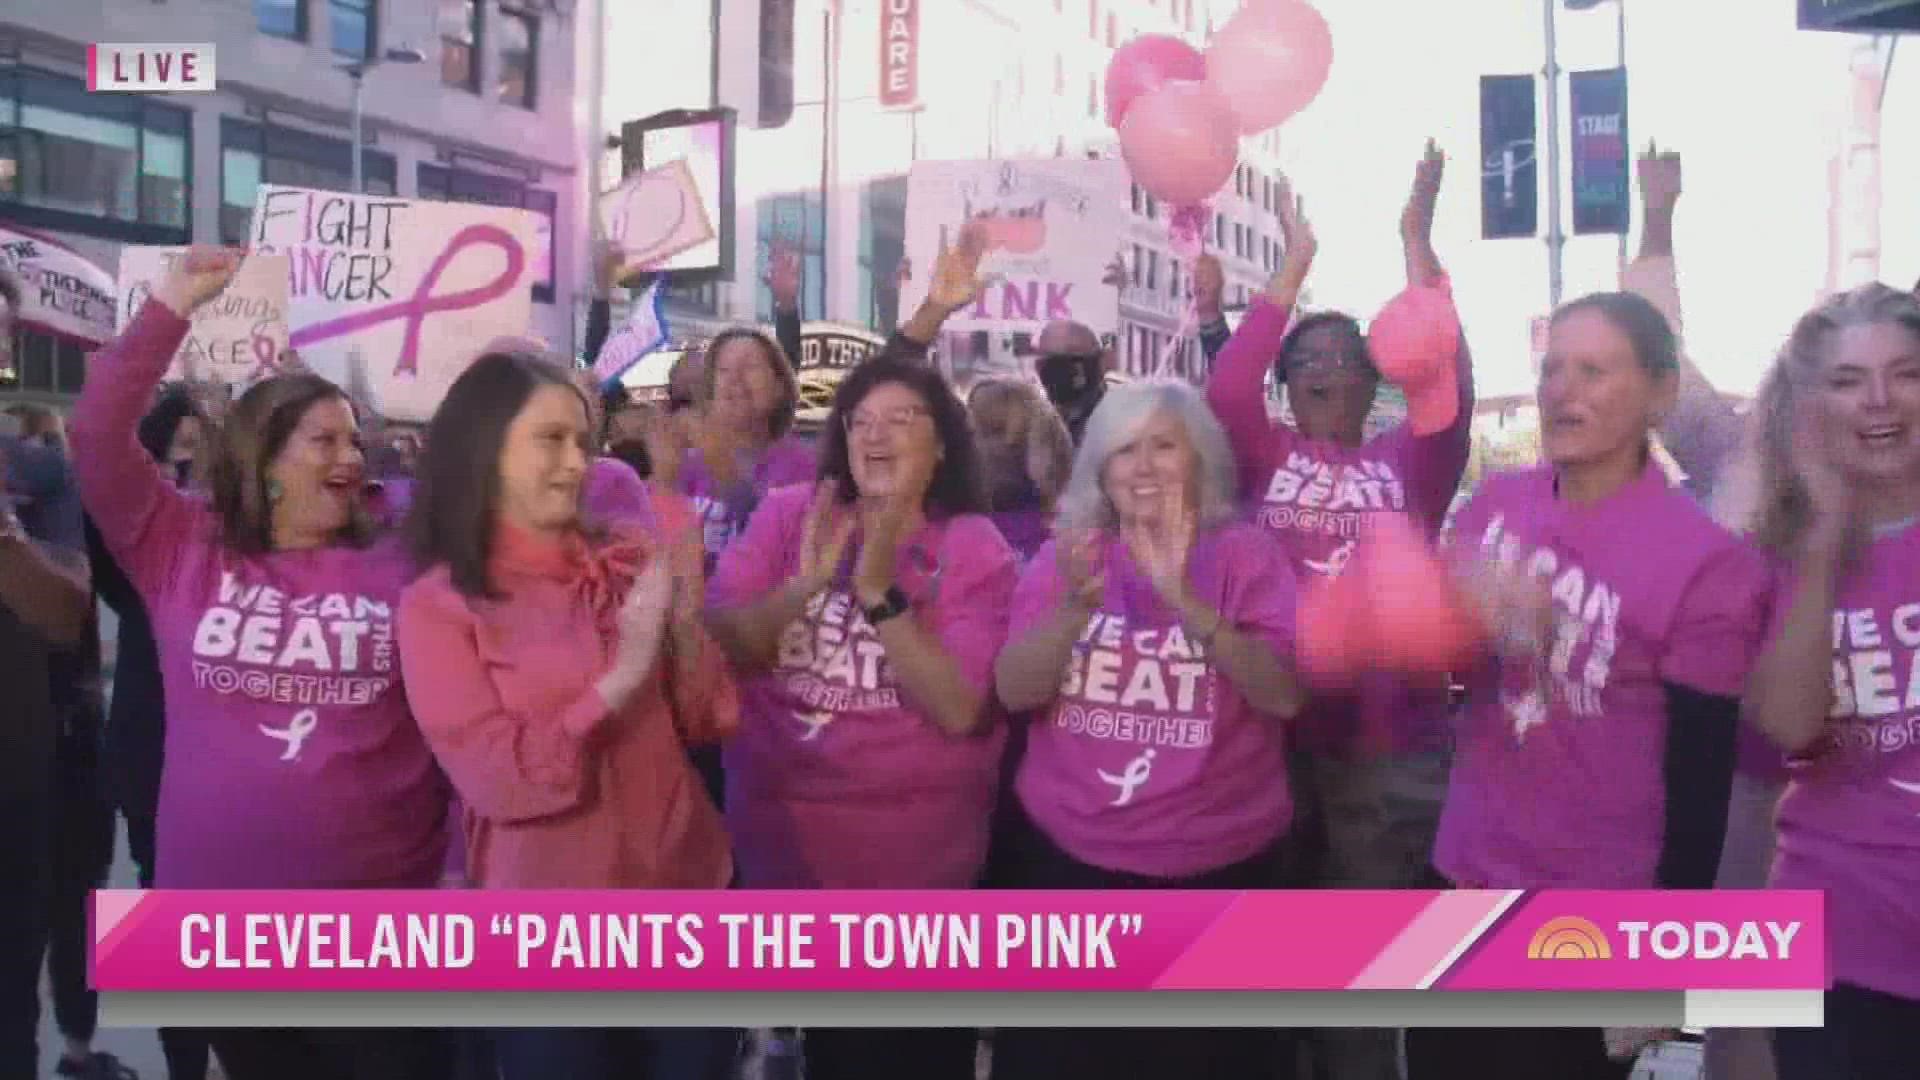 The 'TODAY' show was in Cleveland to kick off Breast Cancer Awareness Month with their paint the town pink initiative.